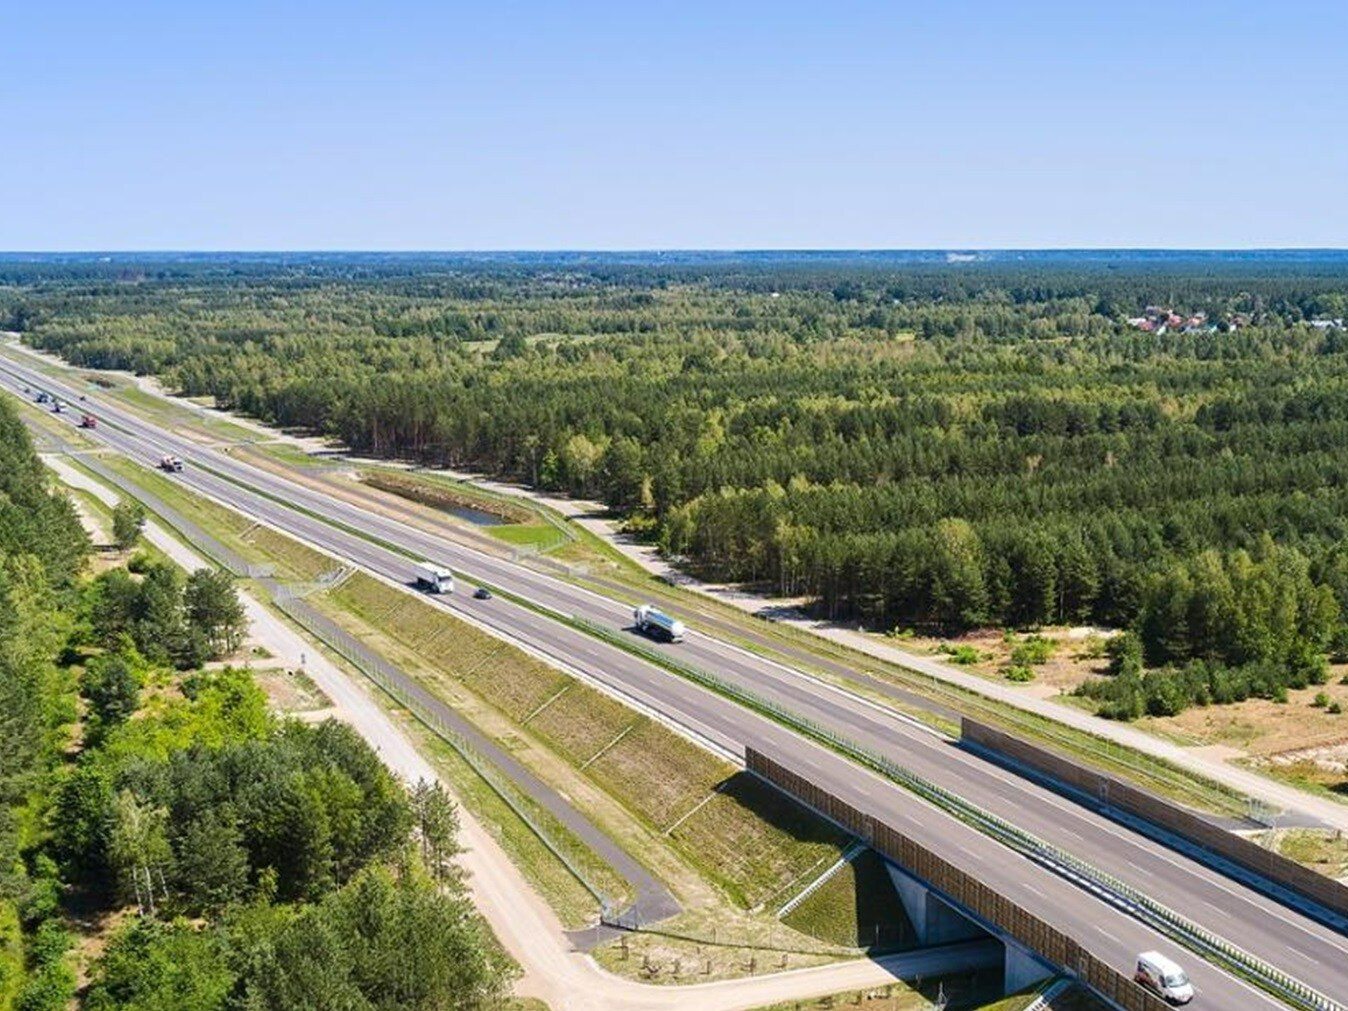 Via Carpatia trail.  There is new news regarding the construction of S19 in the province.  Podlasie